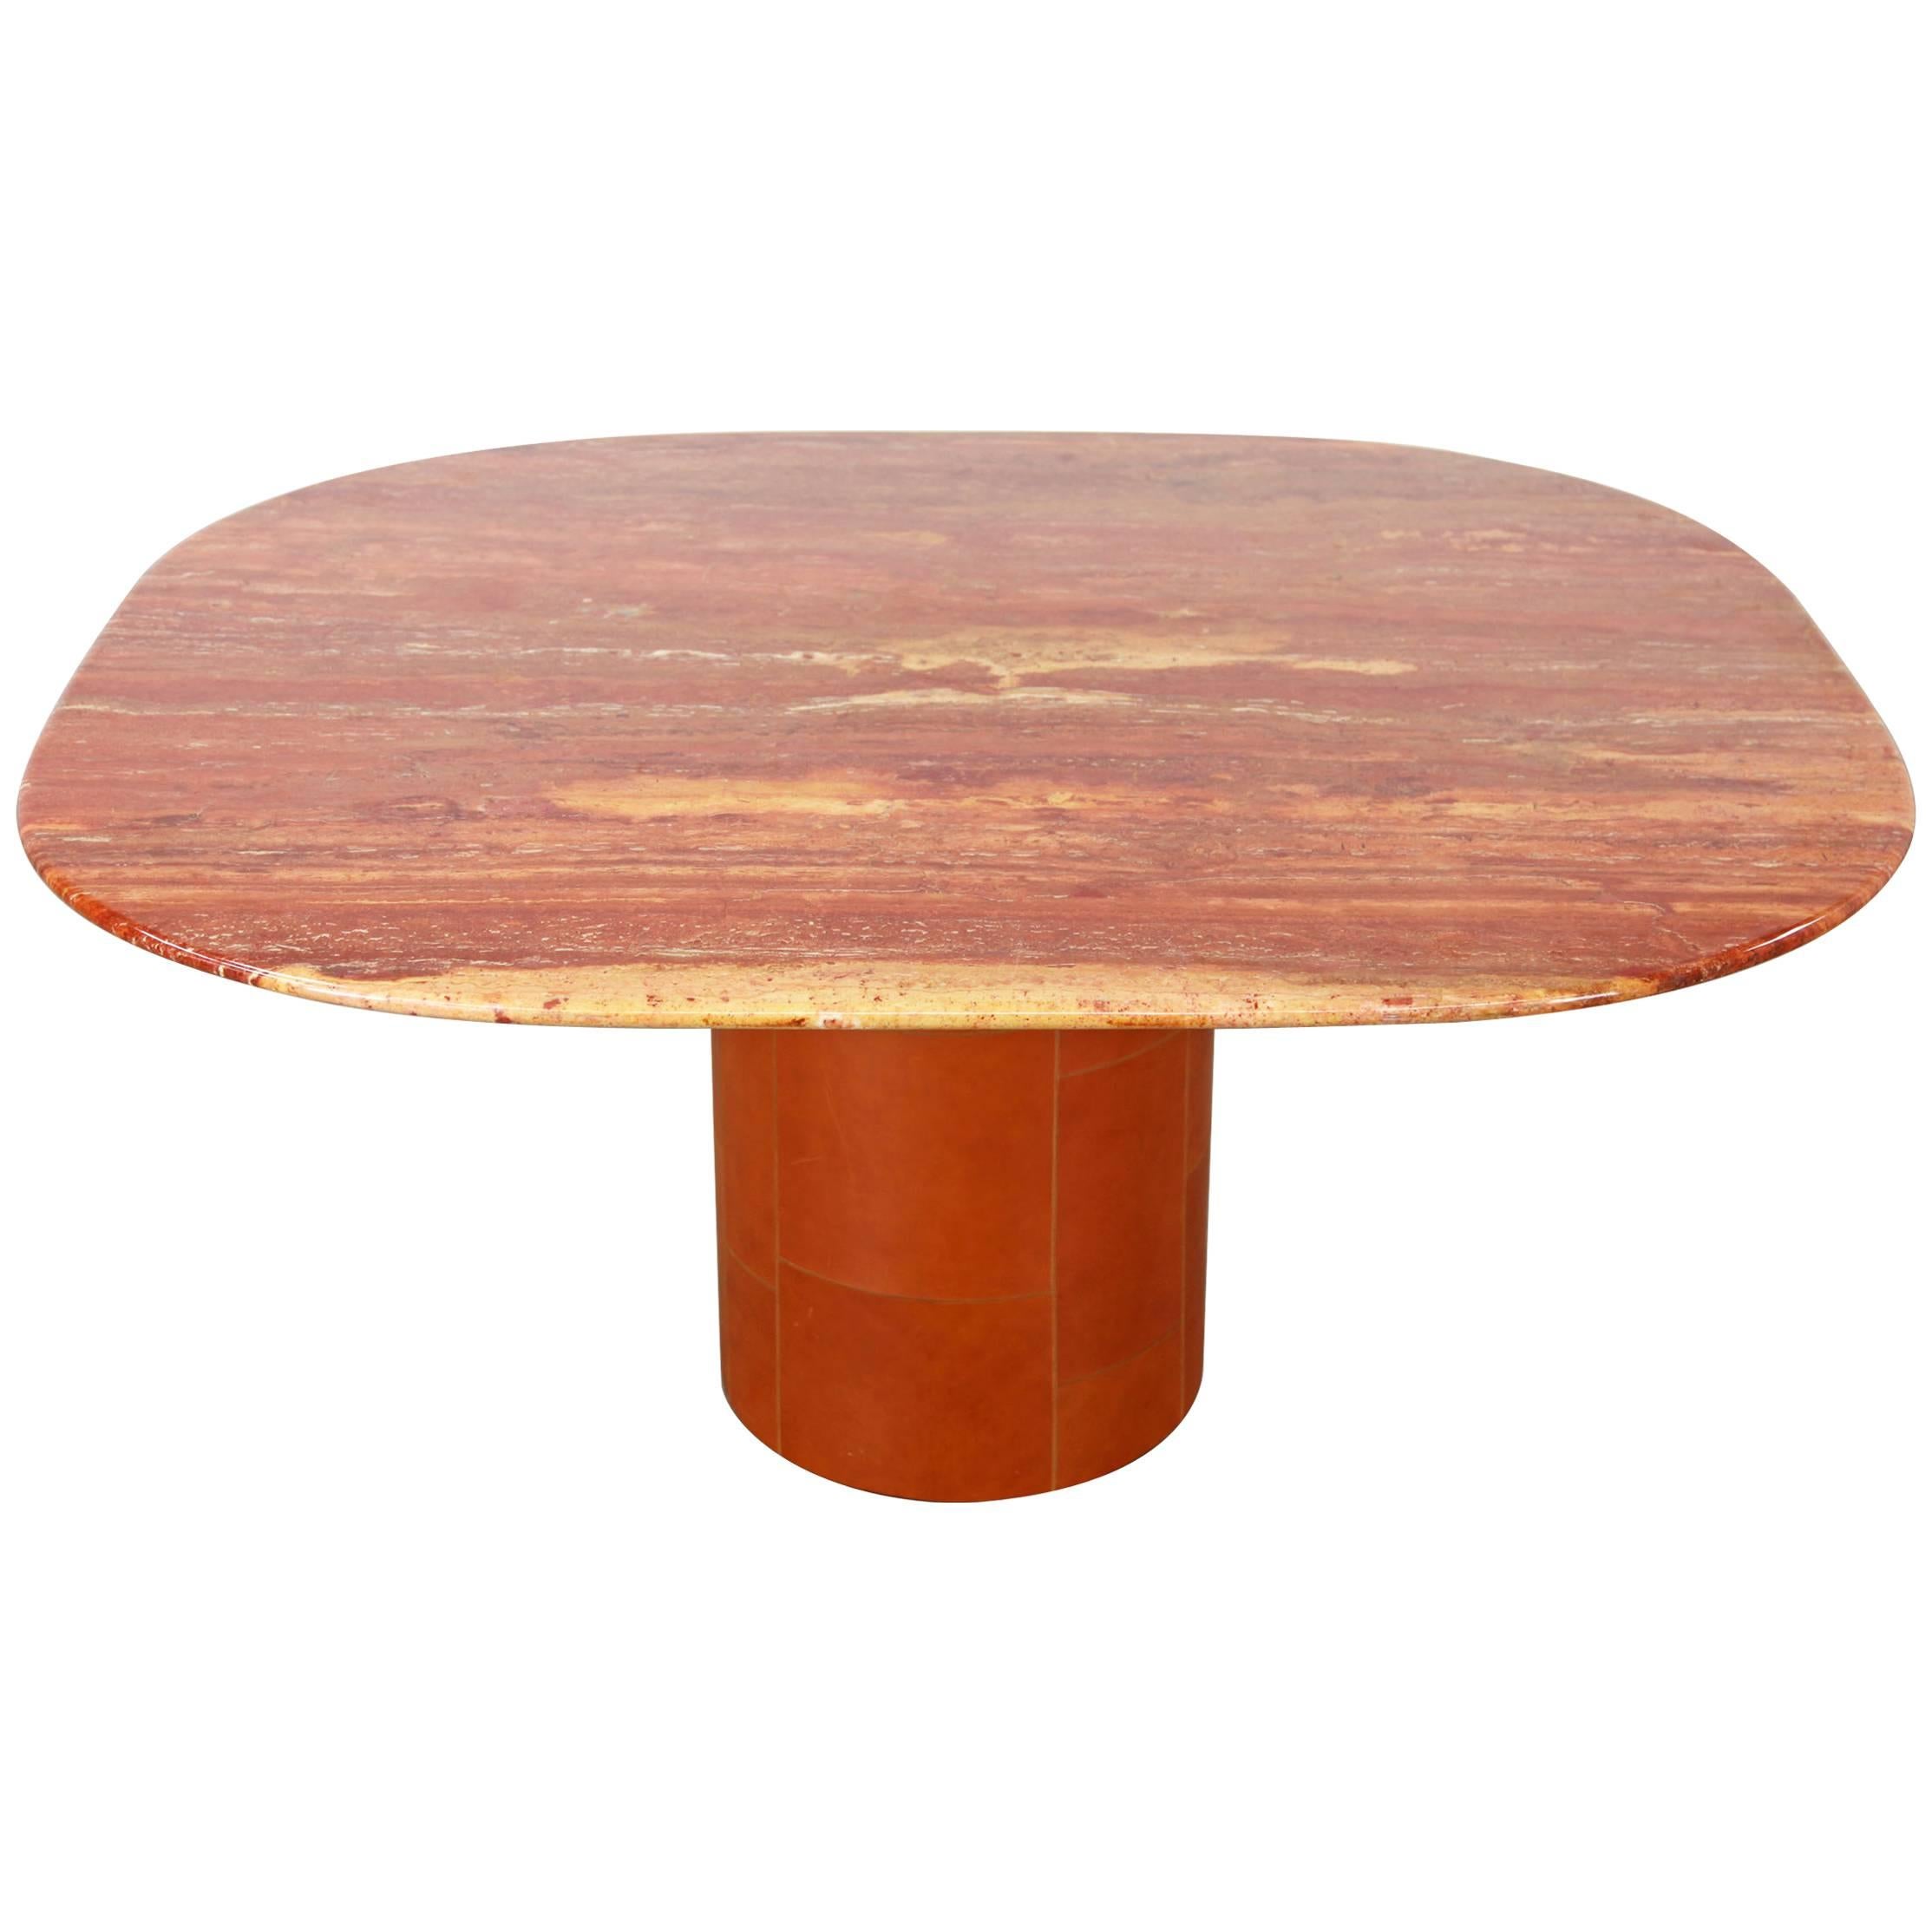 Table by B & B Italia, Made with Red Travertine and Leather